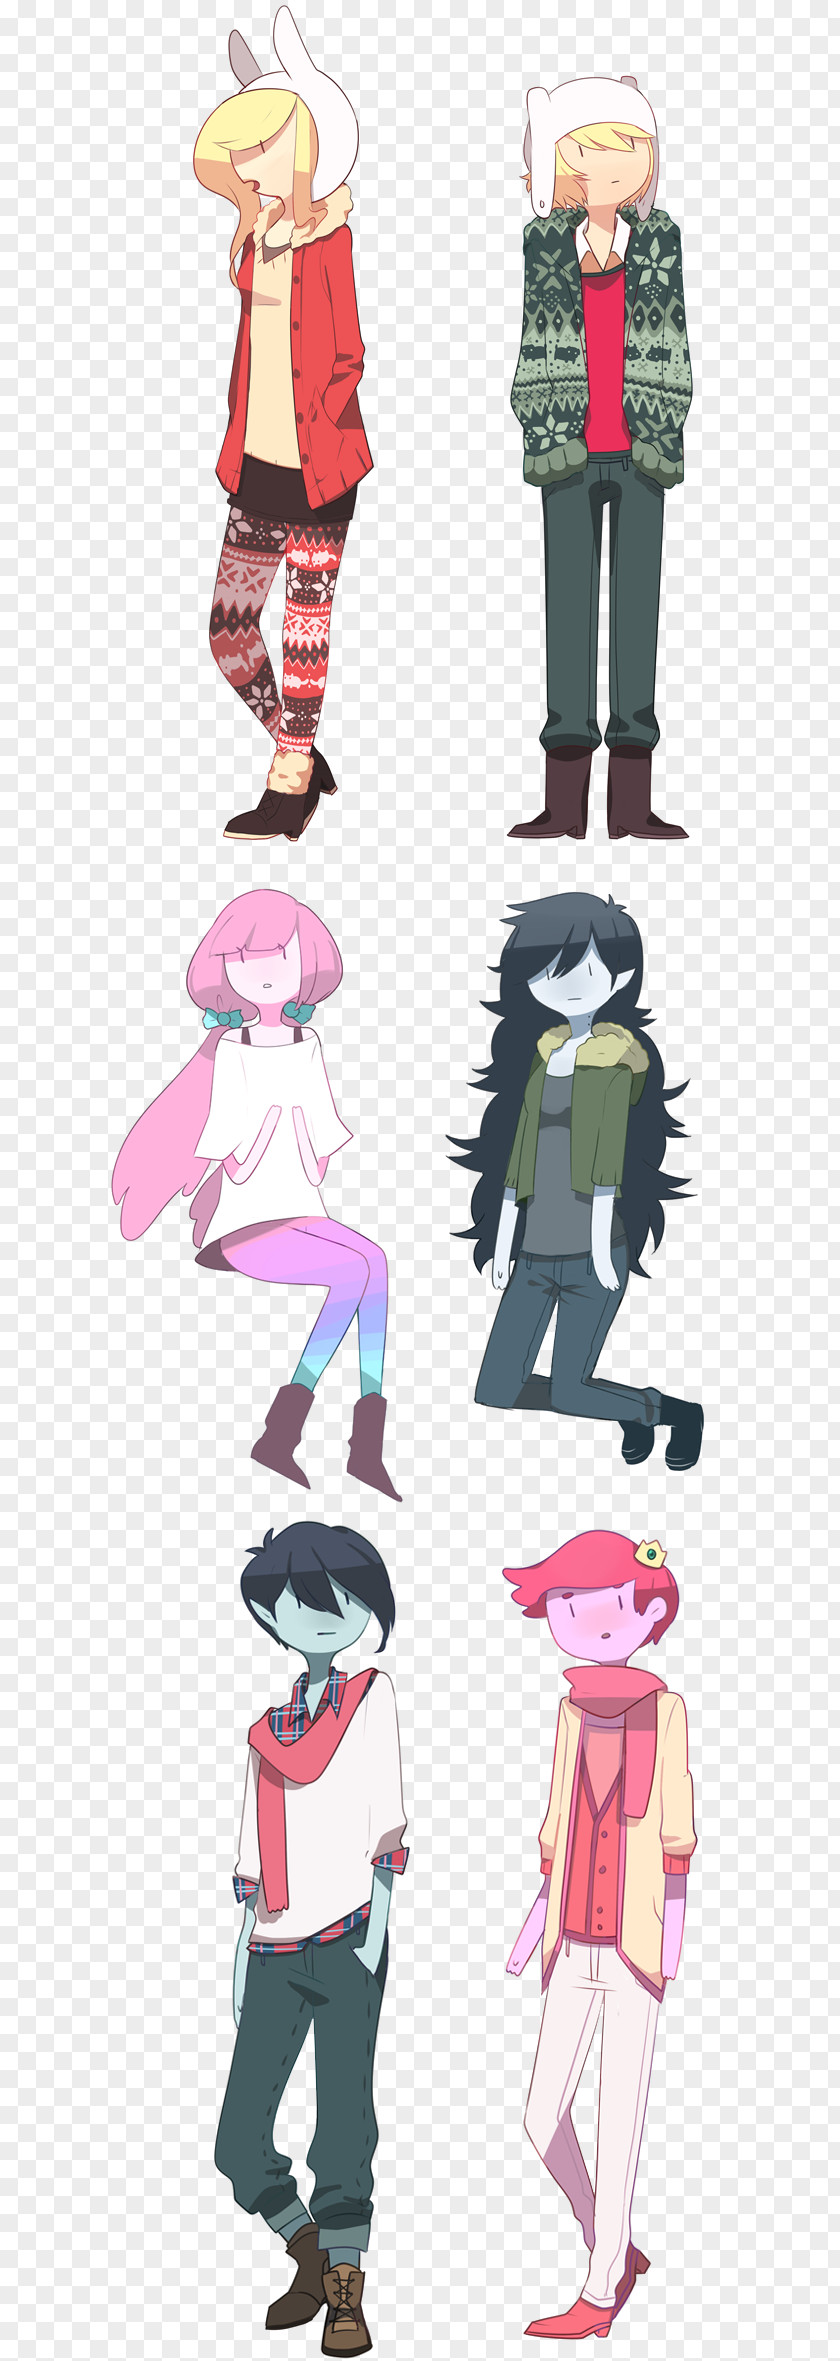 Finn The Human Marceline Vampire Queen Princess Bubblegum Ice King Fionna And Cake PNG